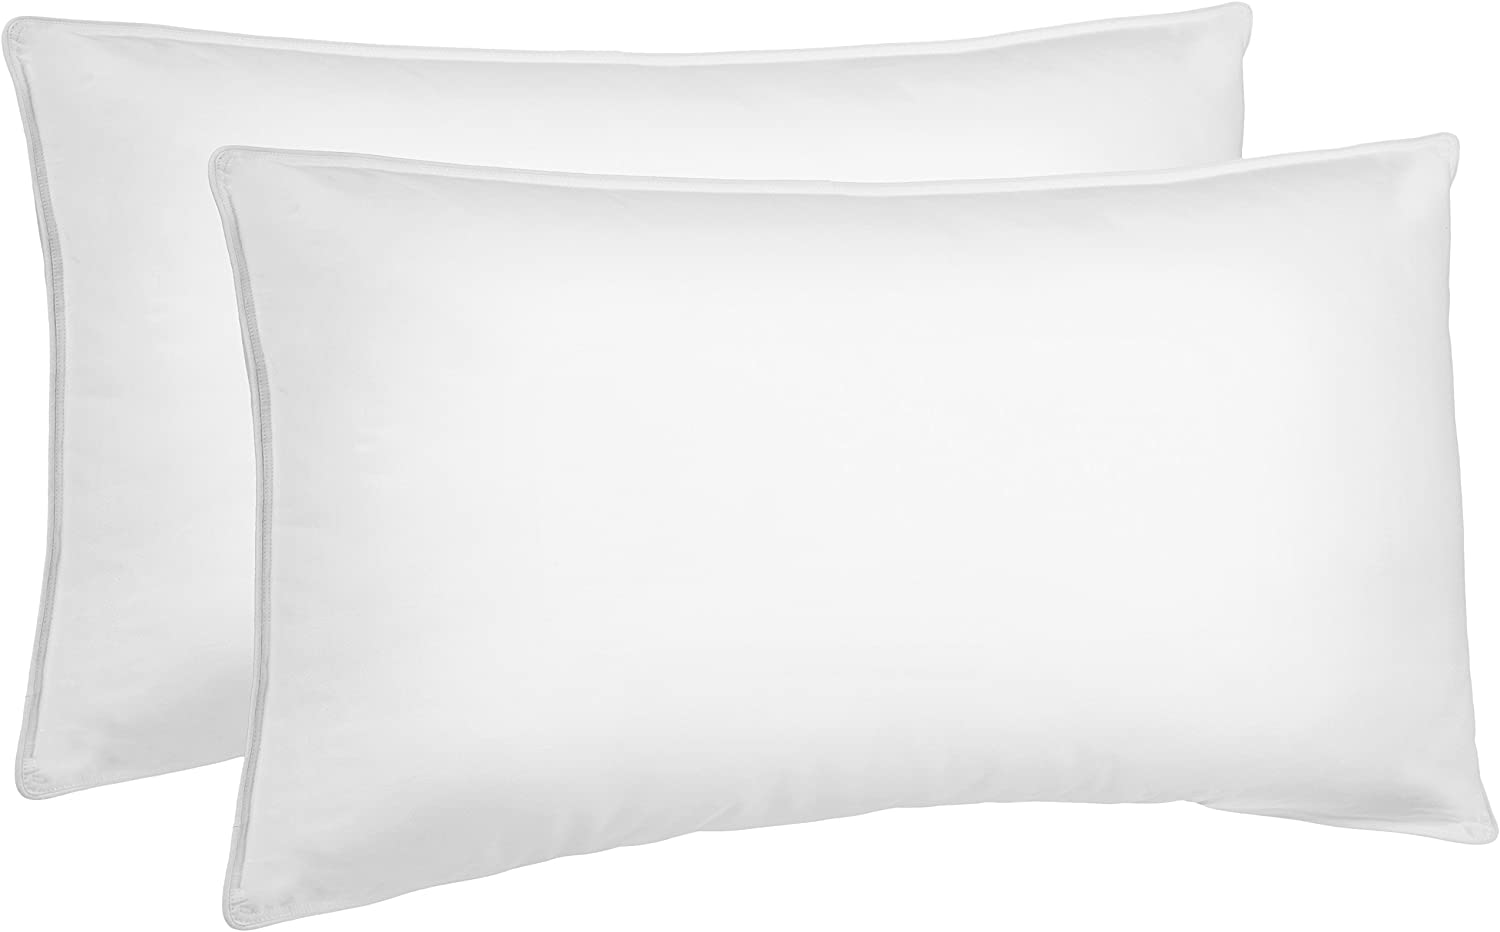 https://www.dontwasteyourmoney.com/wp-content/uploads/2020/09/amazonbasics-down-alternative-bed-pillows-2-pack-pillows-for-stomach-sleepers.jpg